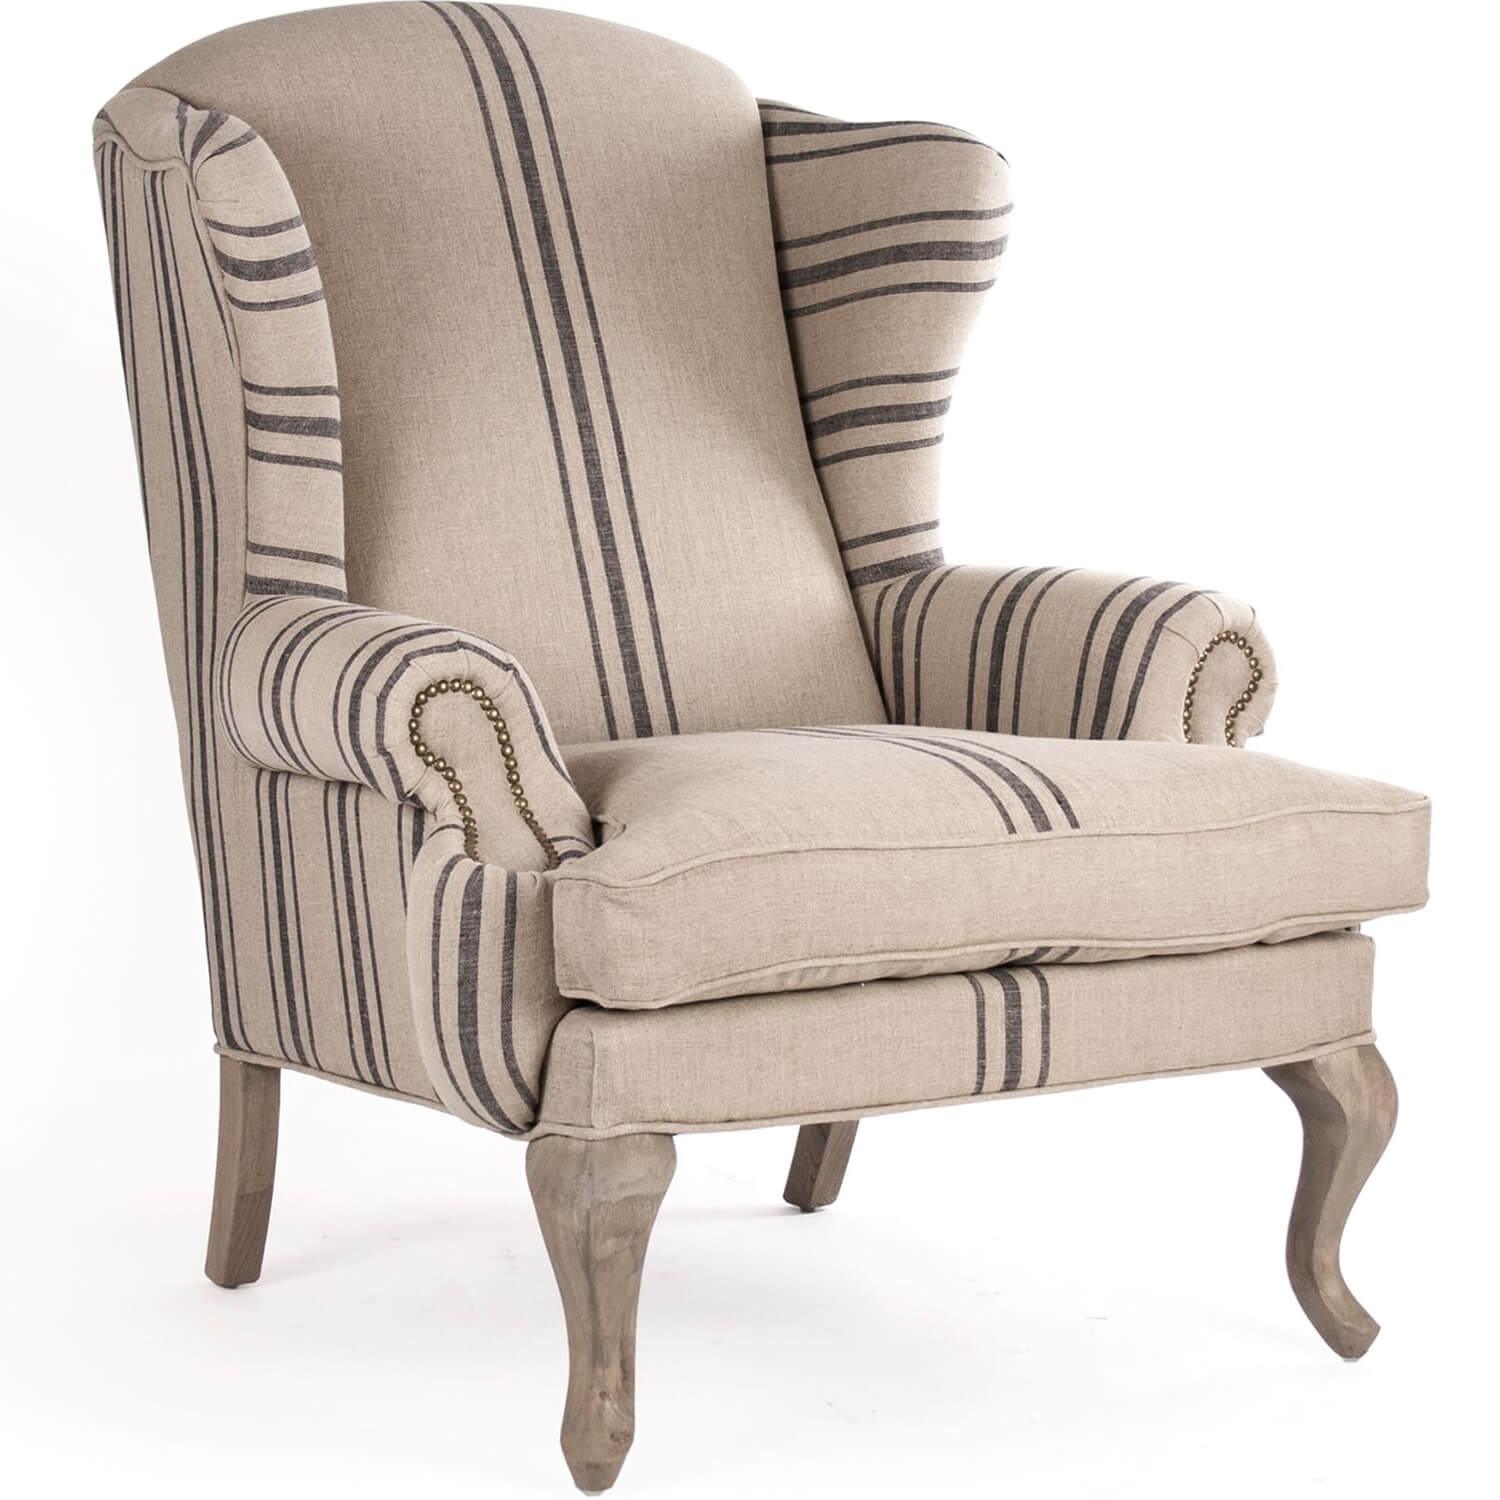 French Blue Striped Arm Chair - Belle Escape